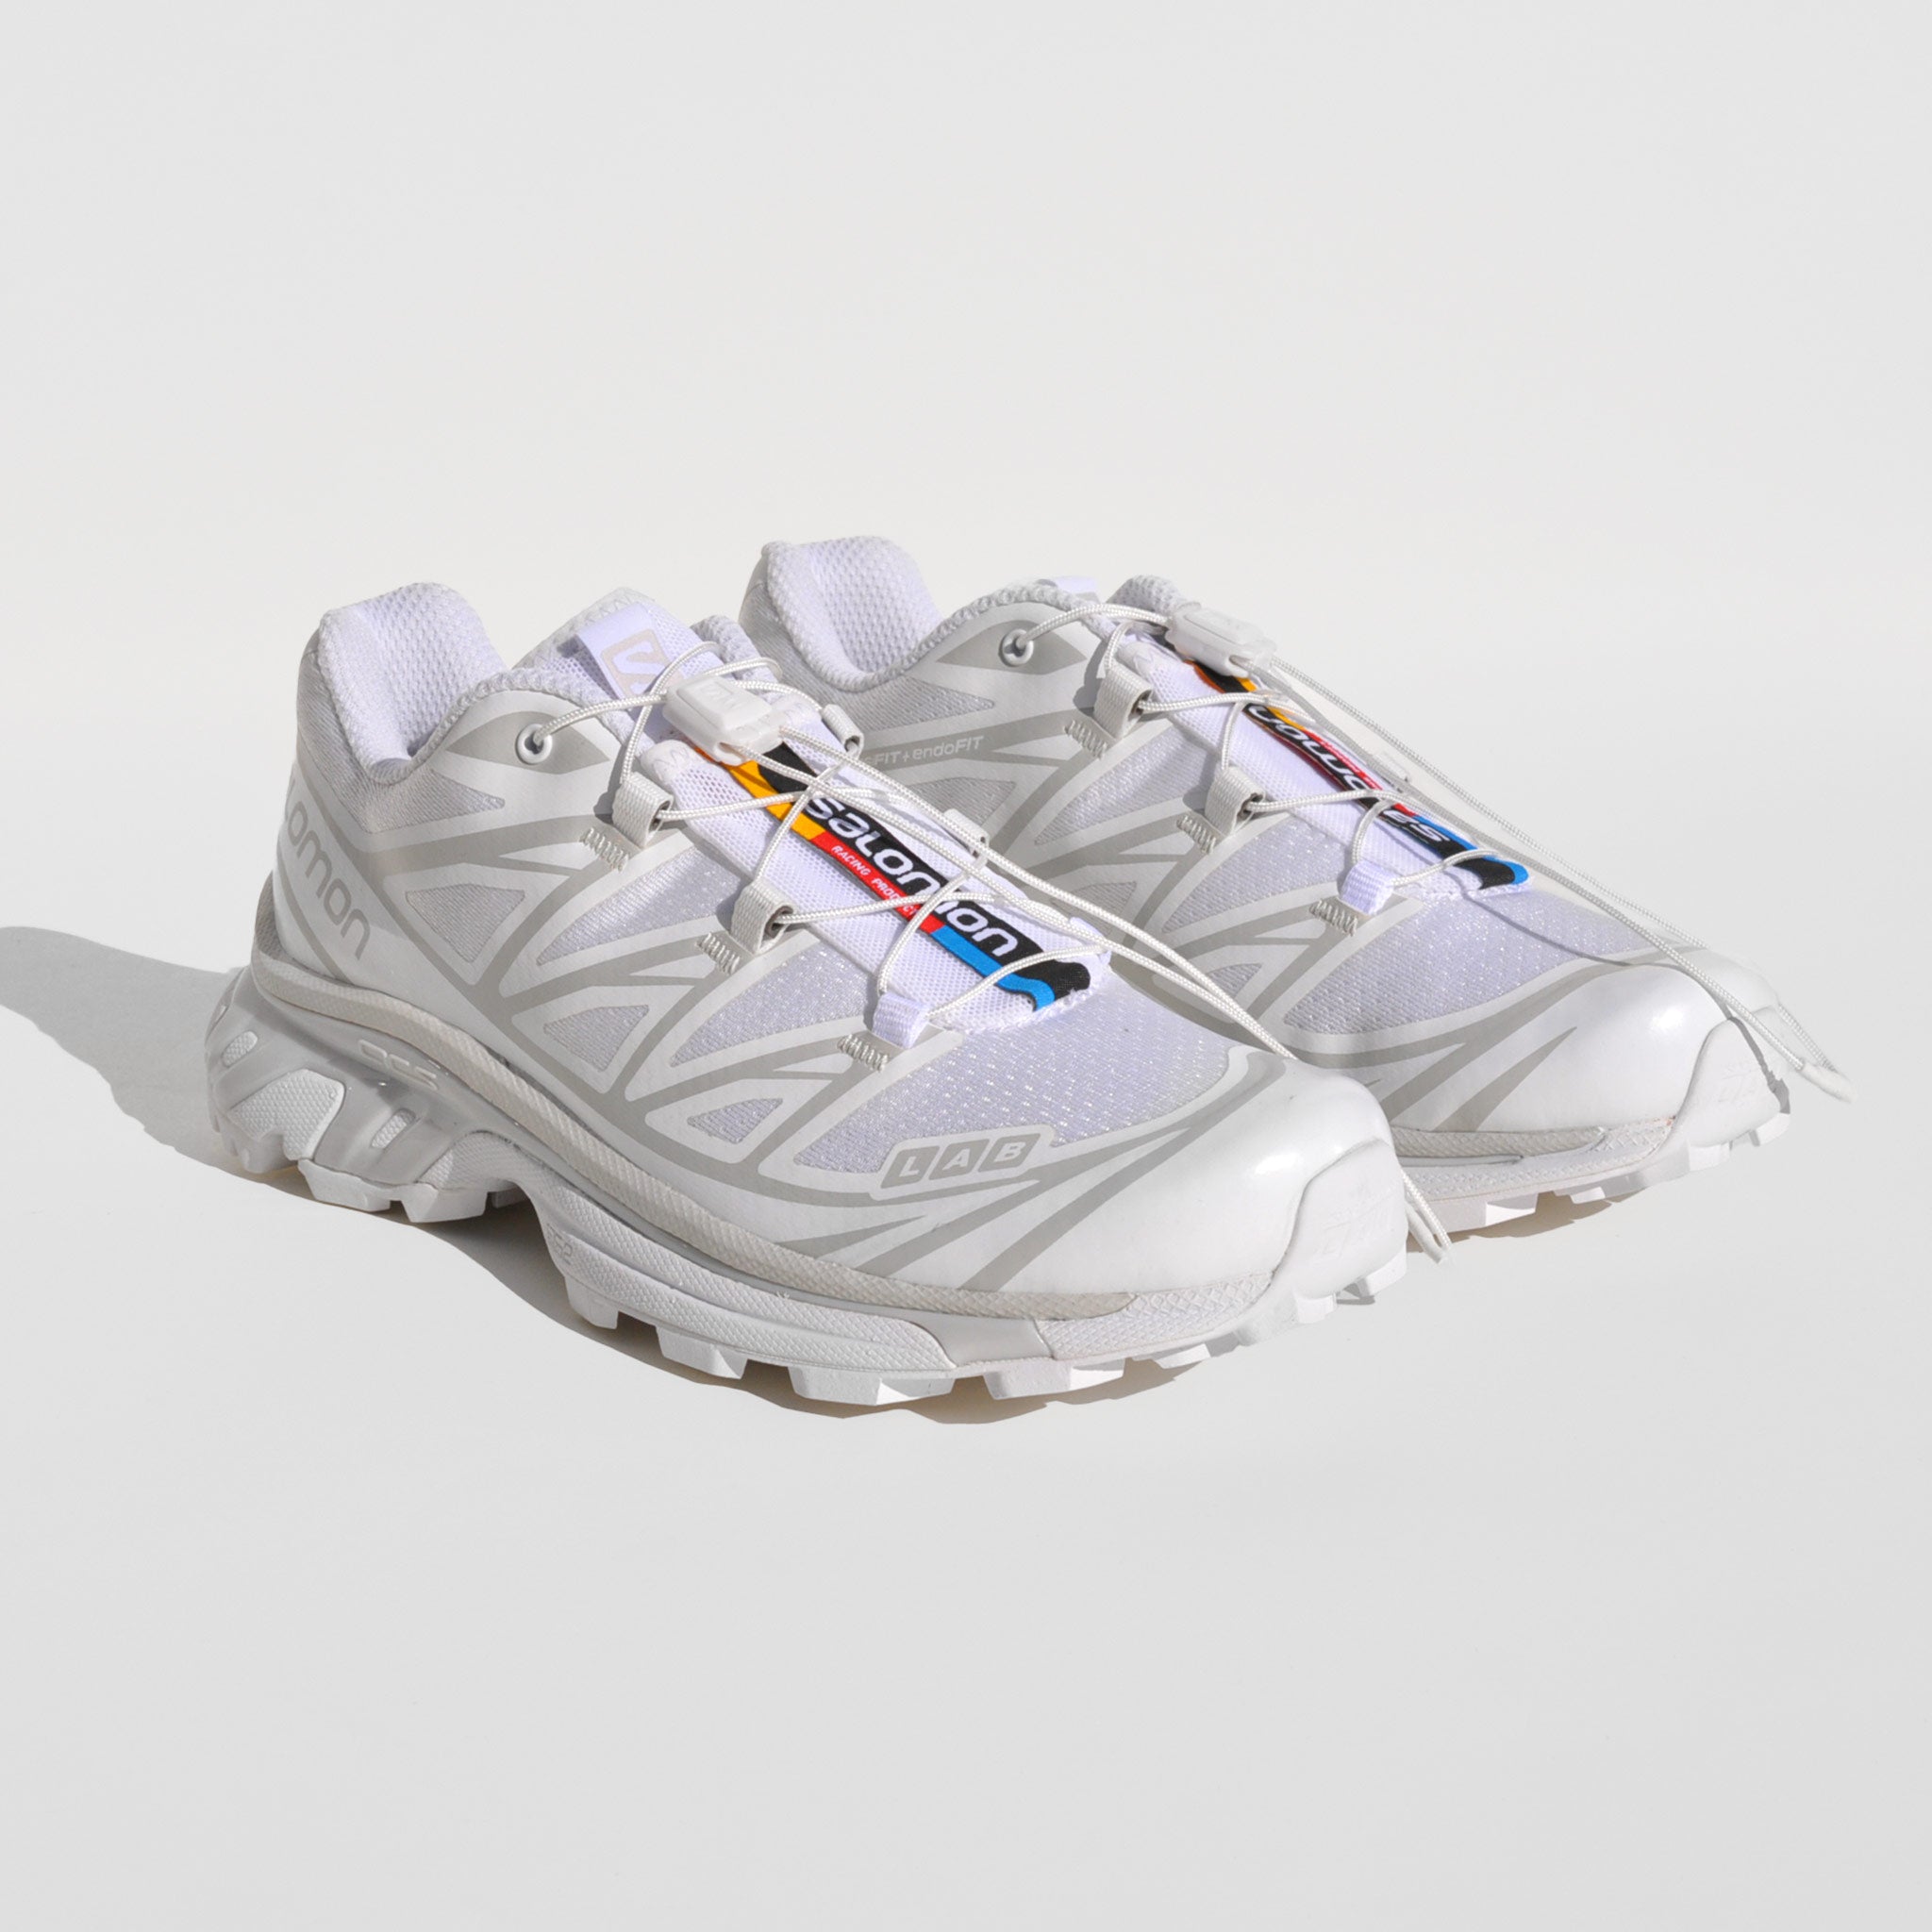 Front image of the XT-6-white sneakers by Salmon sport style in white. These sneakers are white with their rainbow logo down the middle tongue.